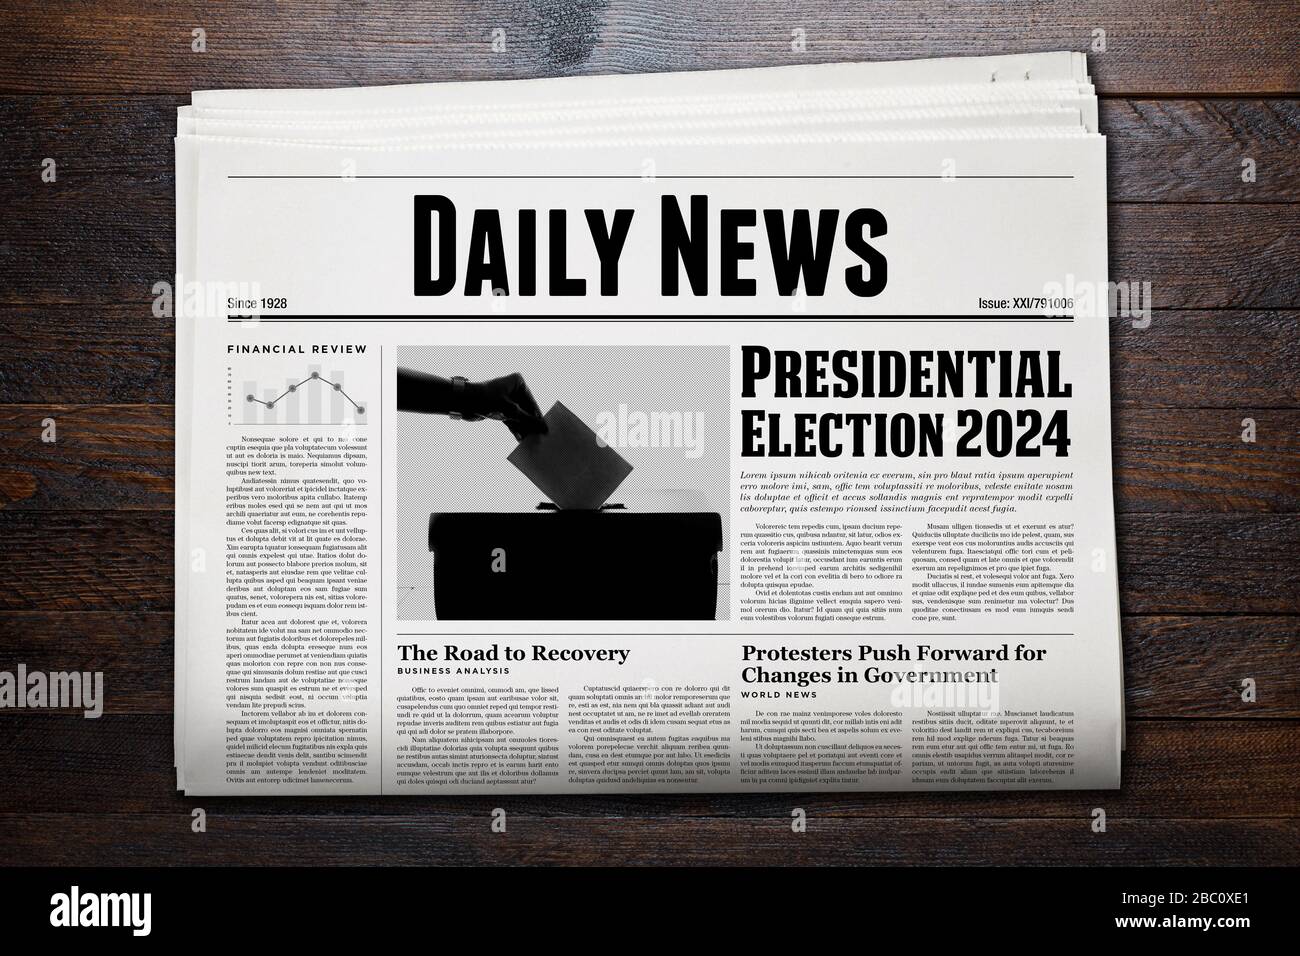 Presidential election 2024 news on daily newspaper. Stock Photo